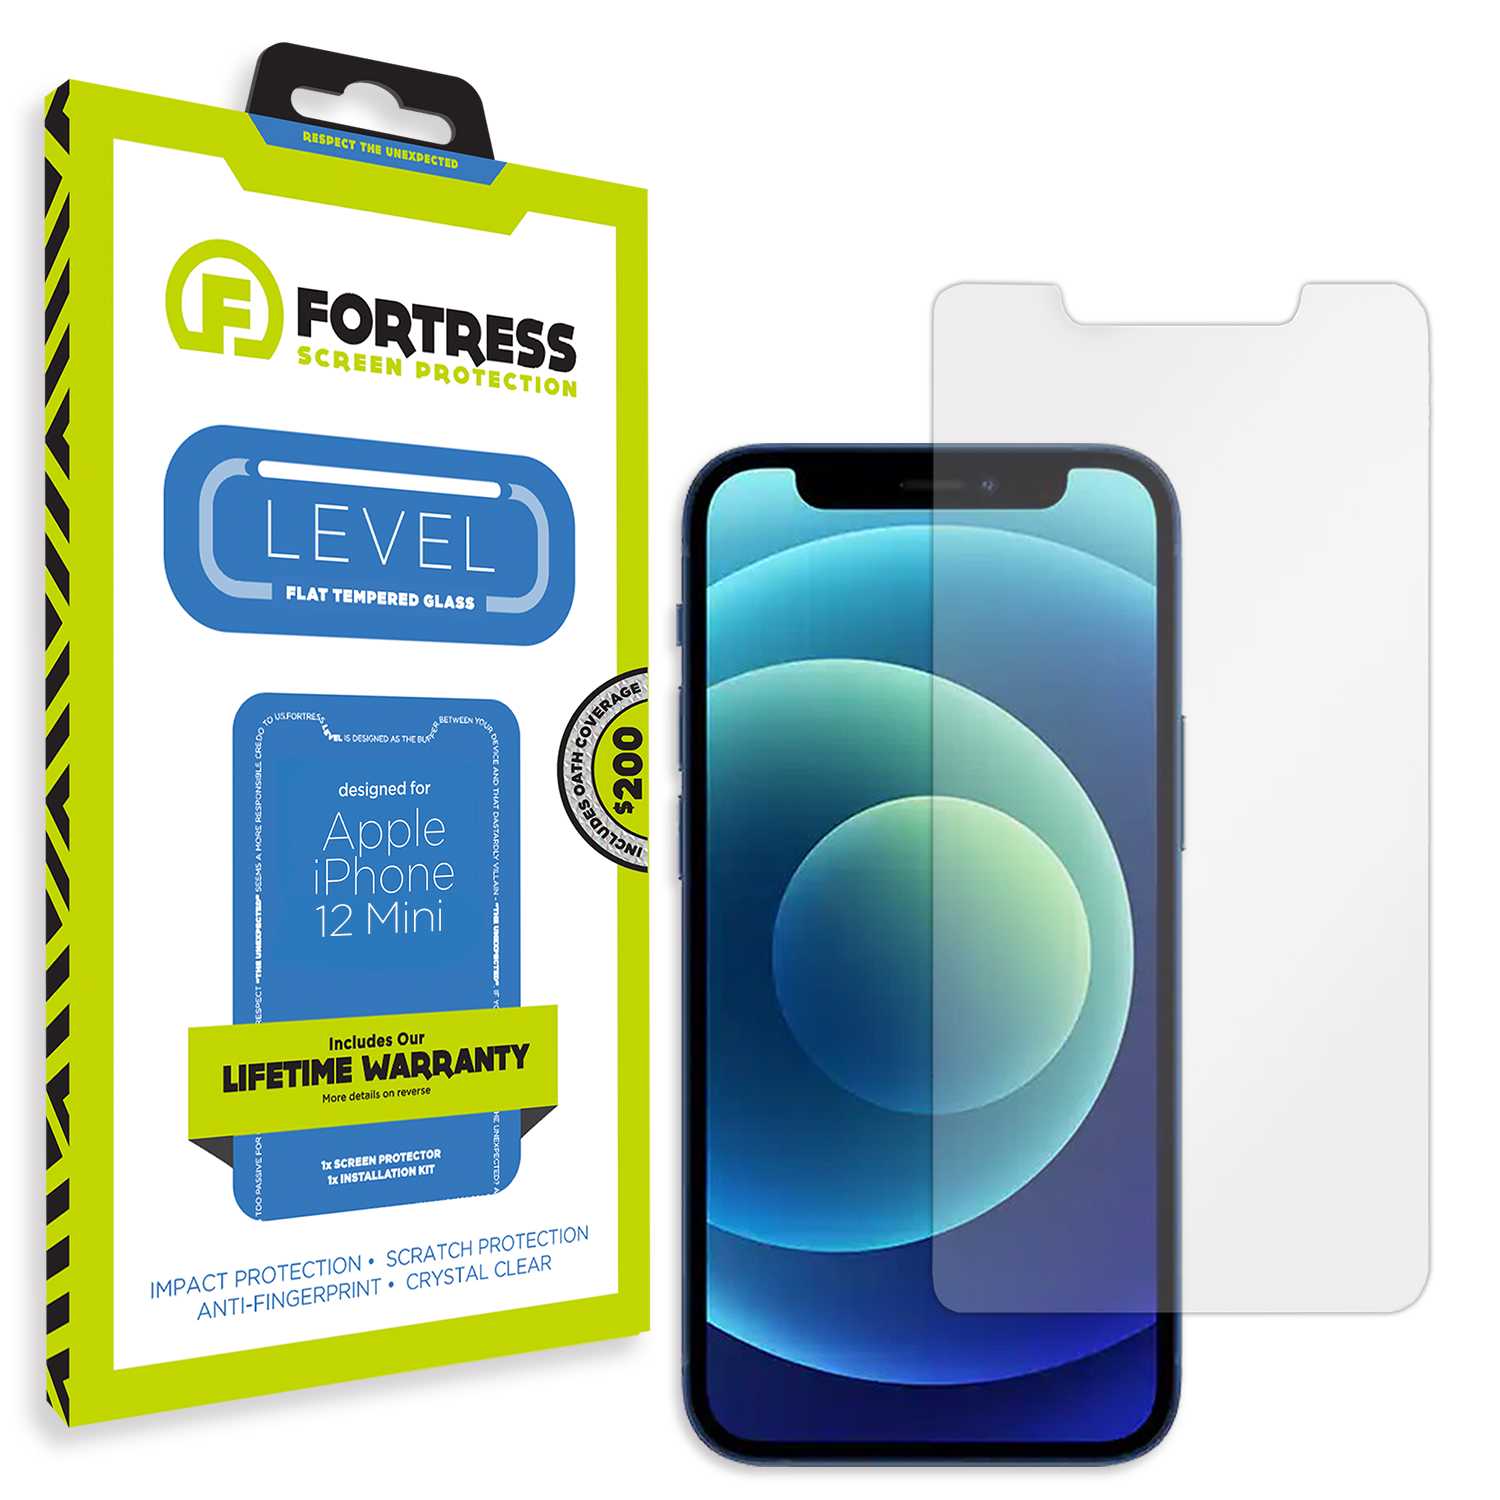 Fortress iPhone 12 Mini Screen Protector $200Coverage Scooch Screen Protector